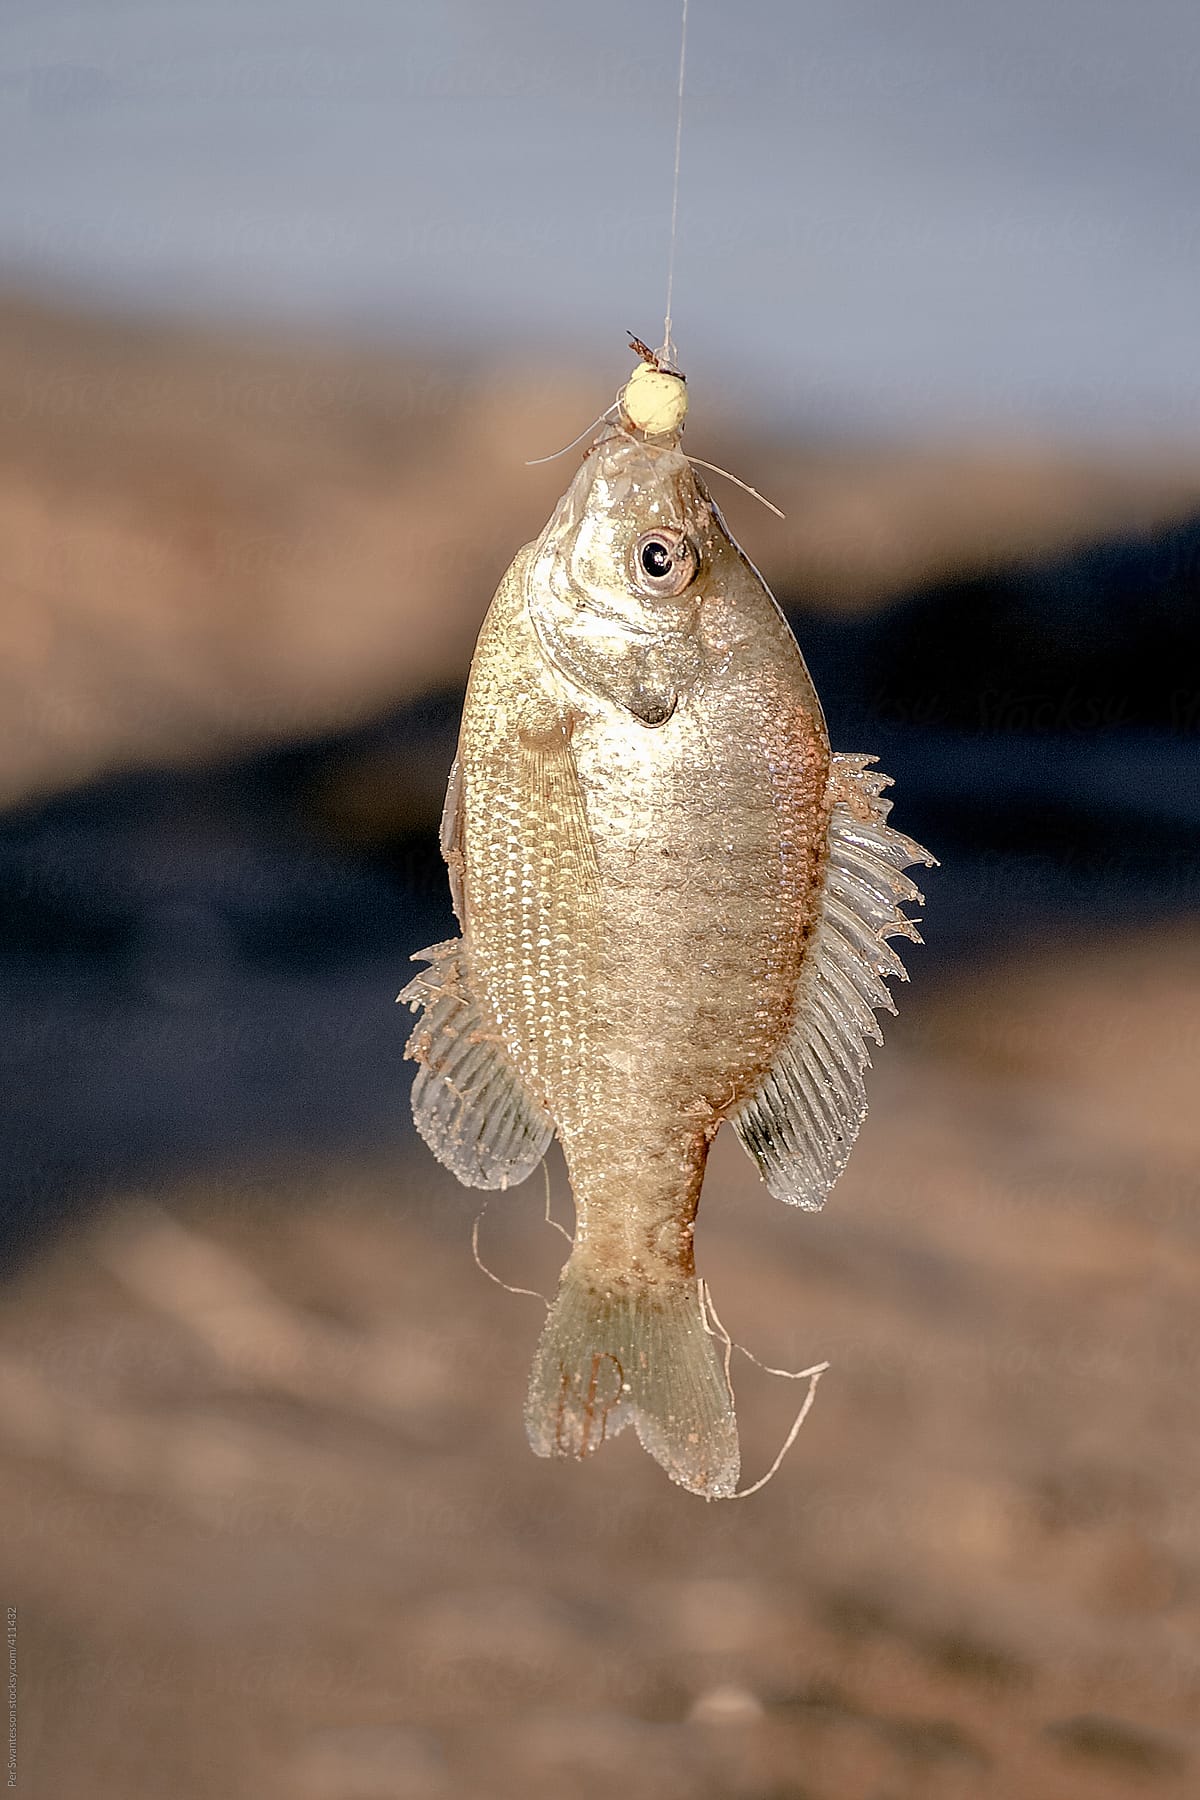 Fresh Catch Of Small Fish In Colorado River by Stocksy Contributor PER  Images - Stocksy